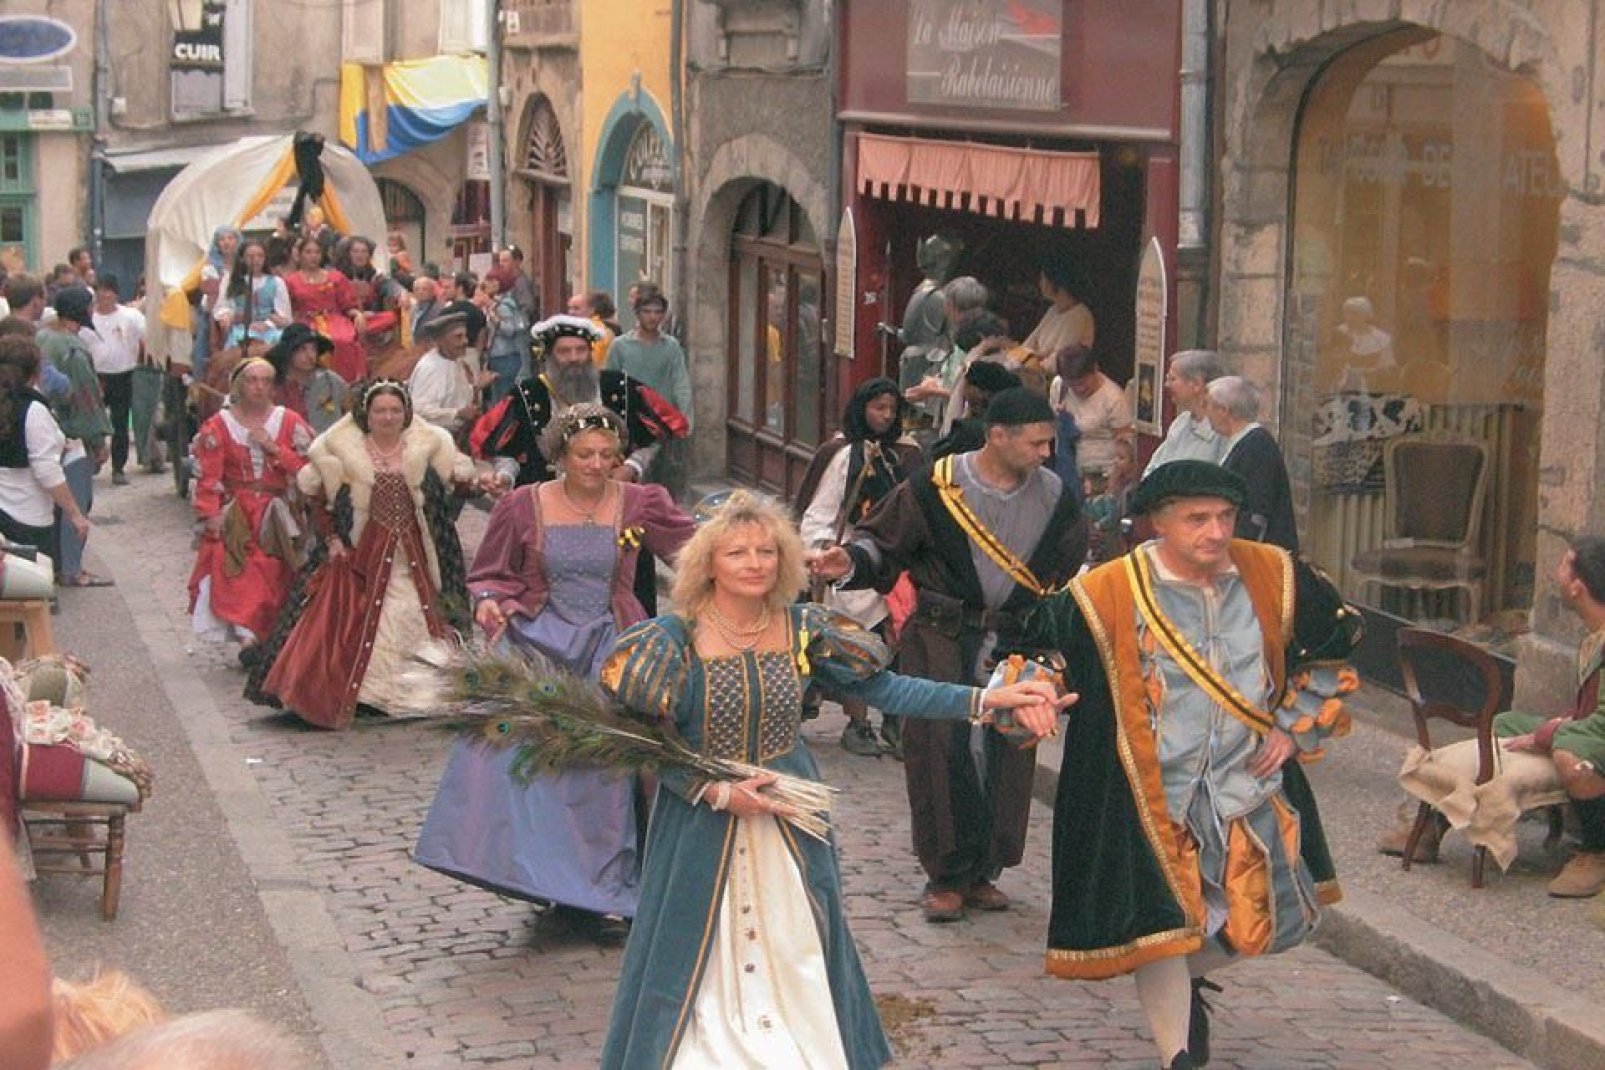 In September, the town organises a large Renaissance festival. It is the perfect occasion to discover the costumes from that period and take part in historical reenactments.